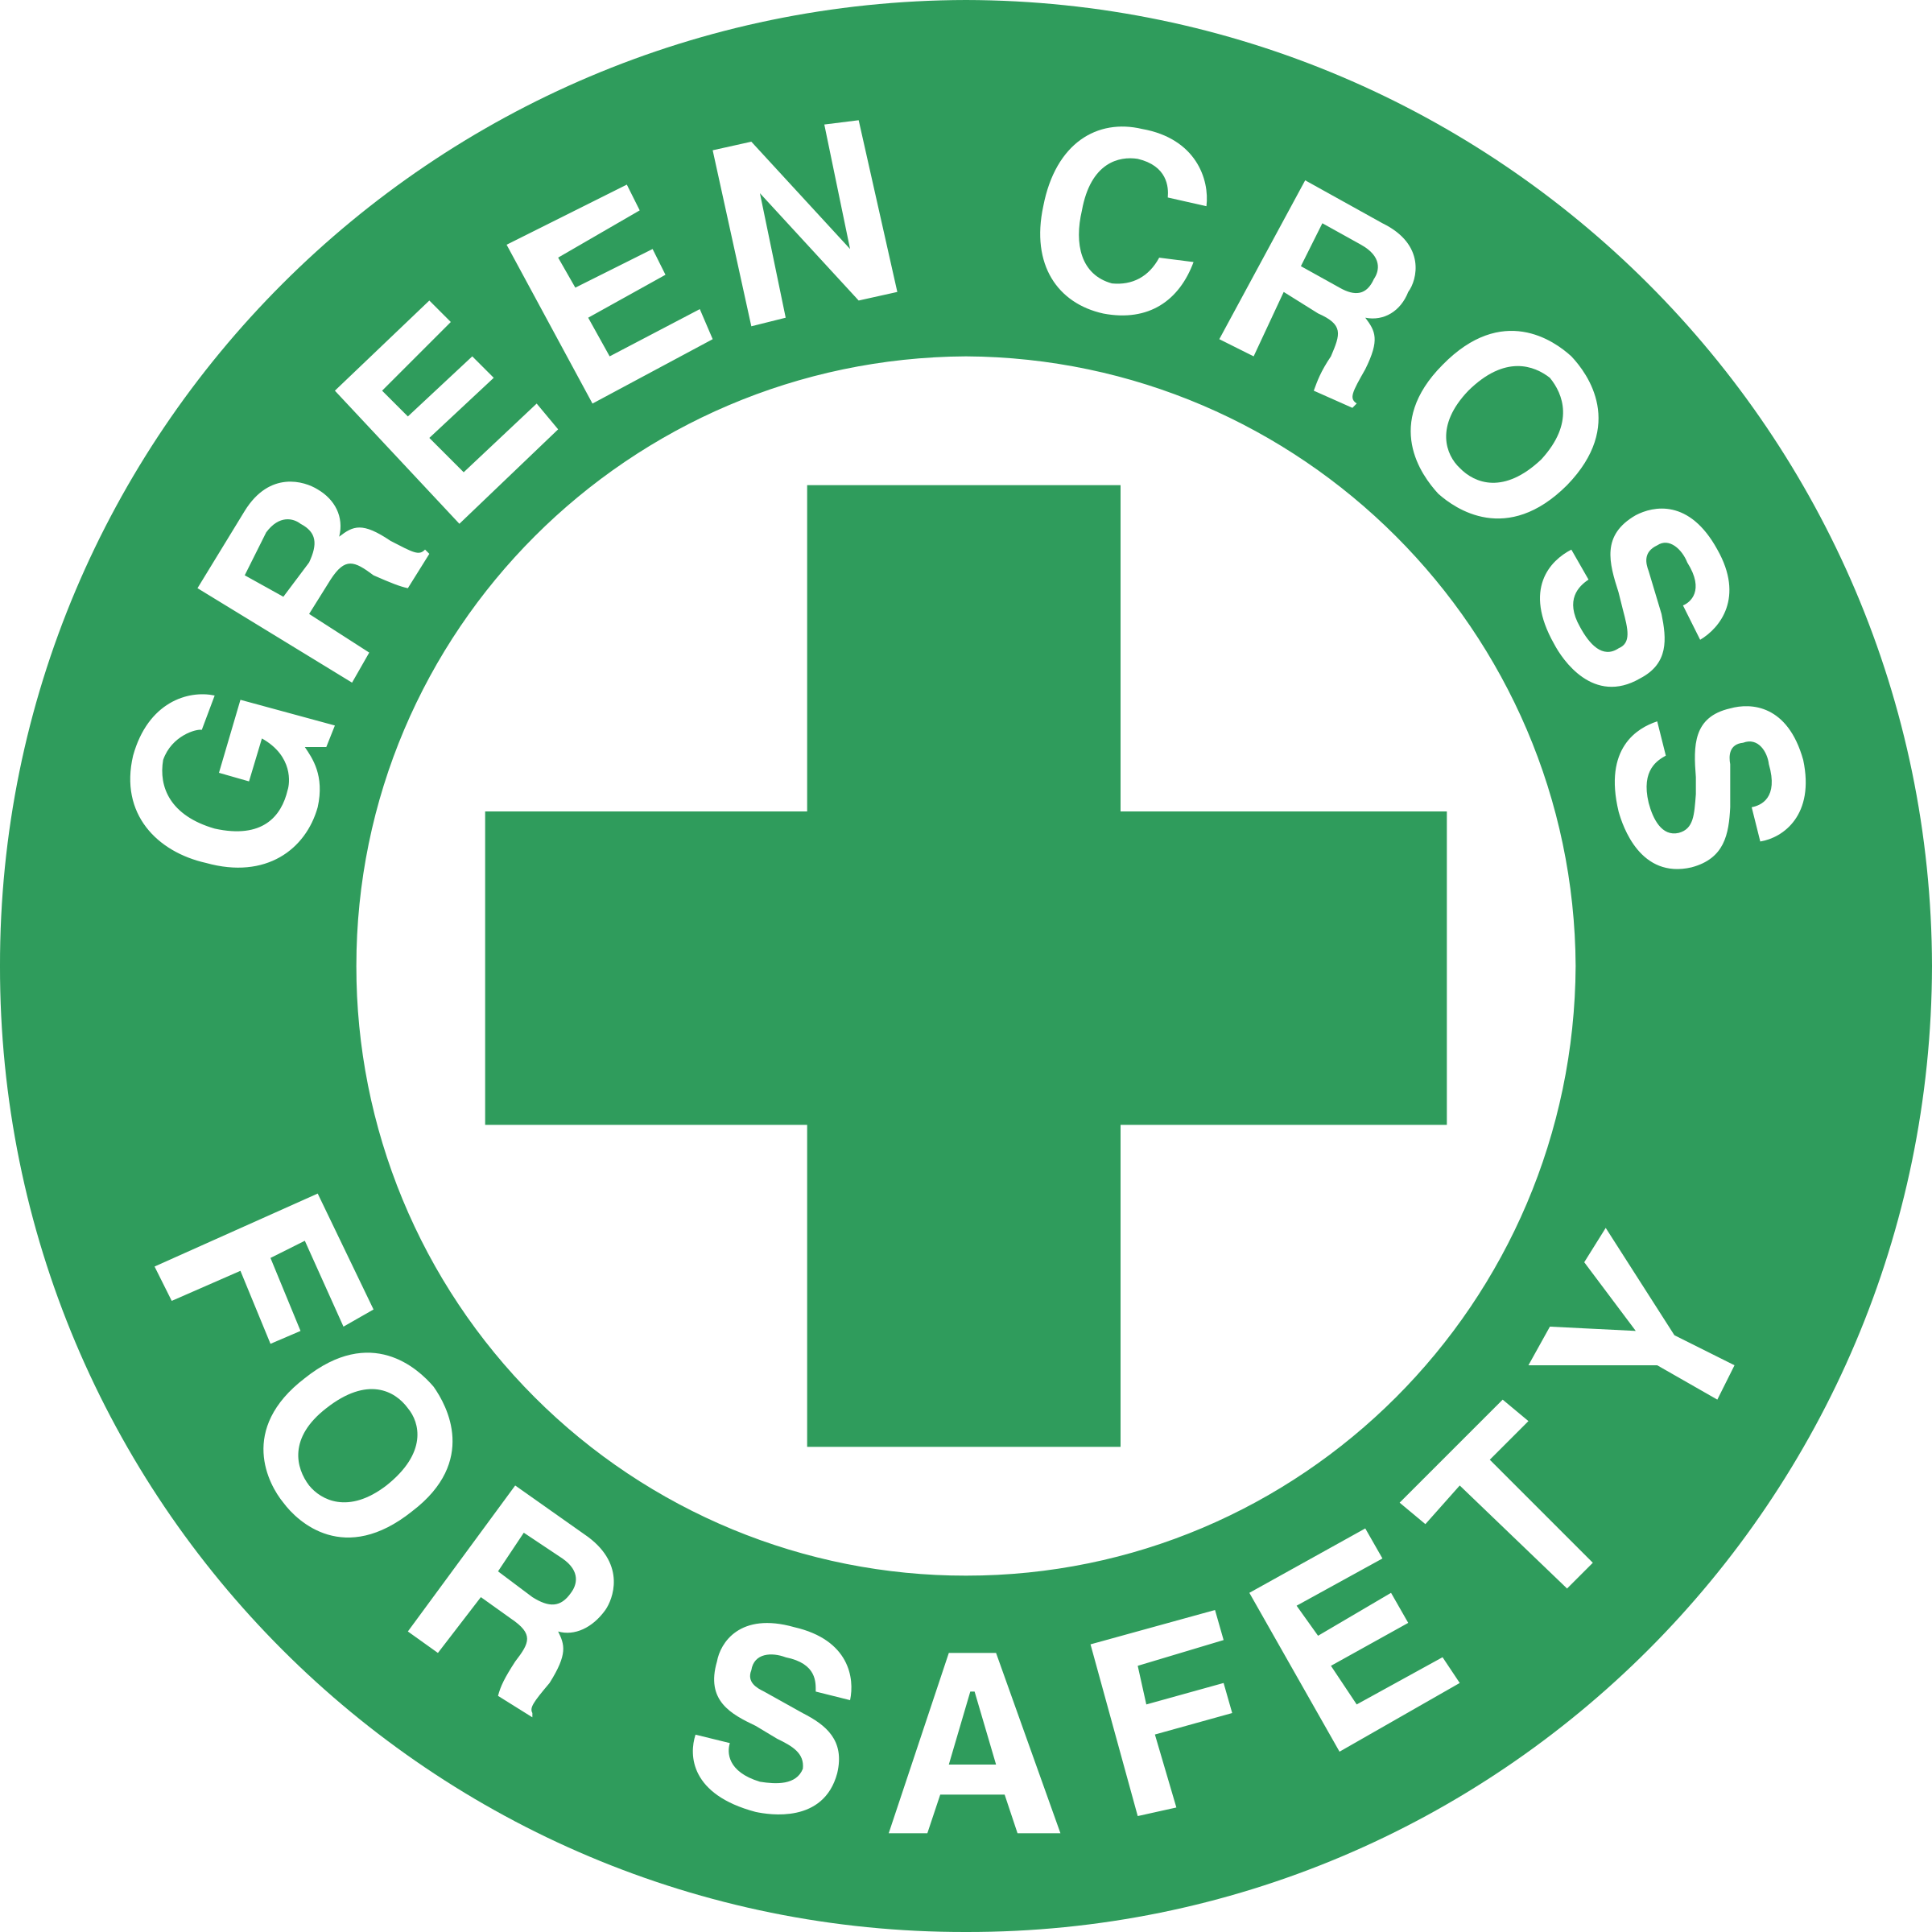 Green Cross For Safety Logo Png Transparent - Distracted Driving Awareness Month (2400x2400)